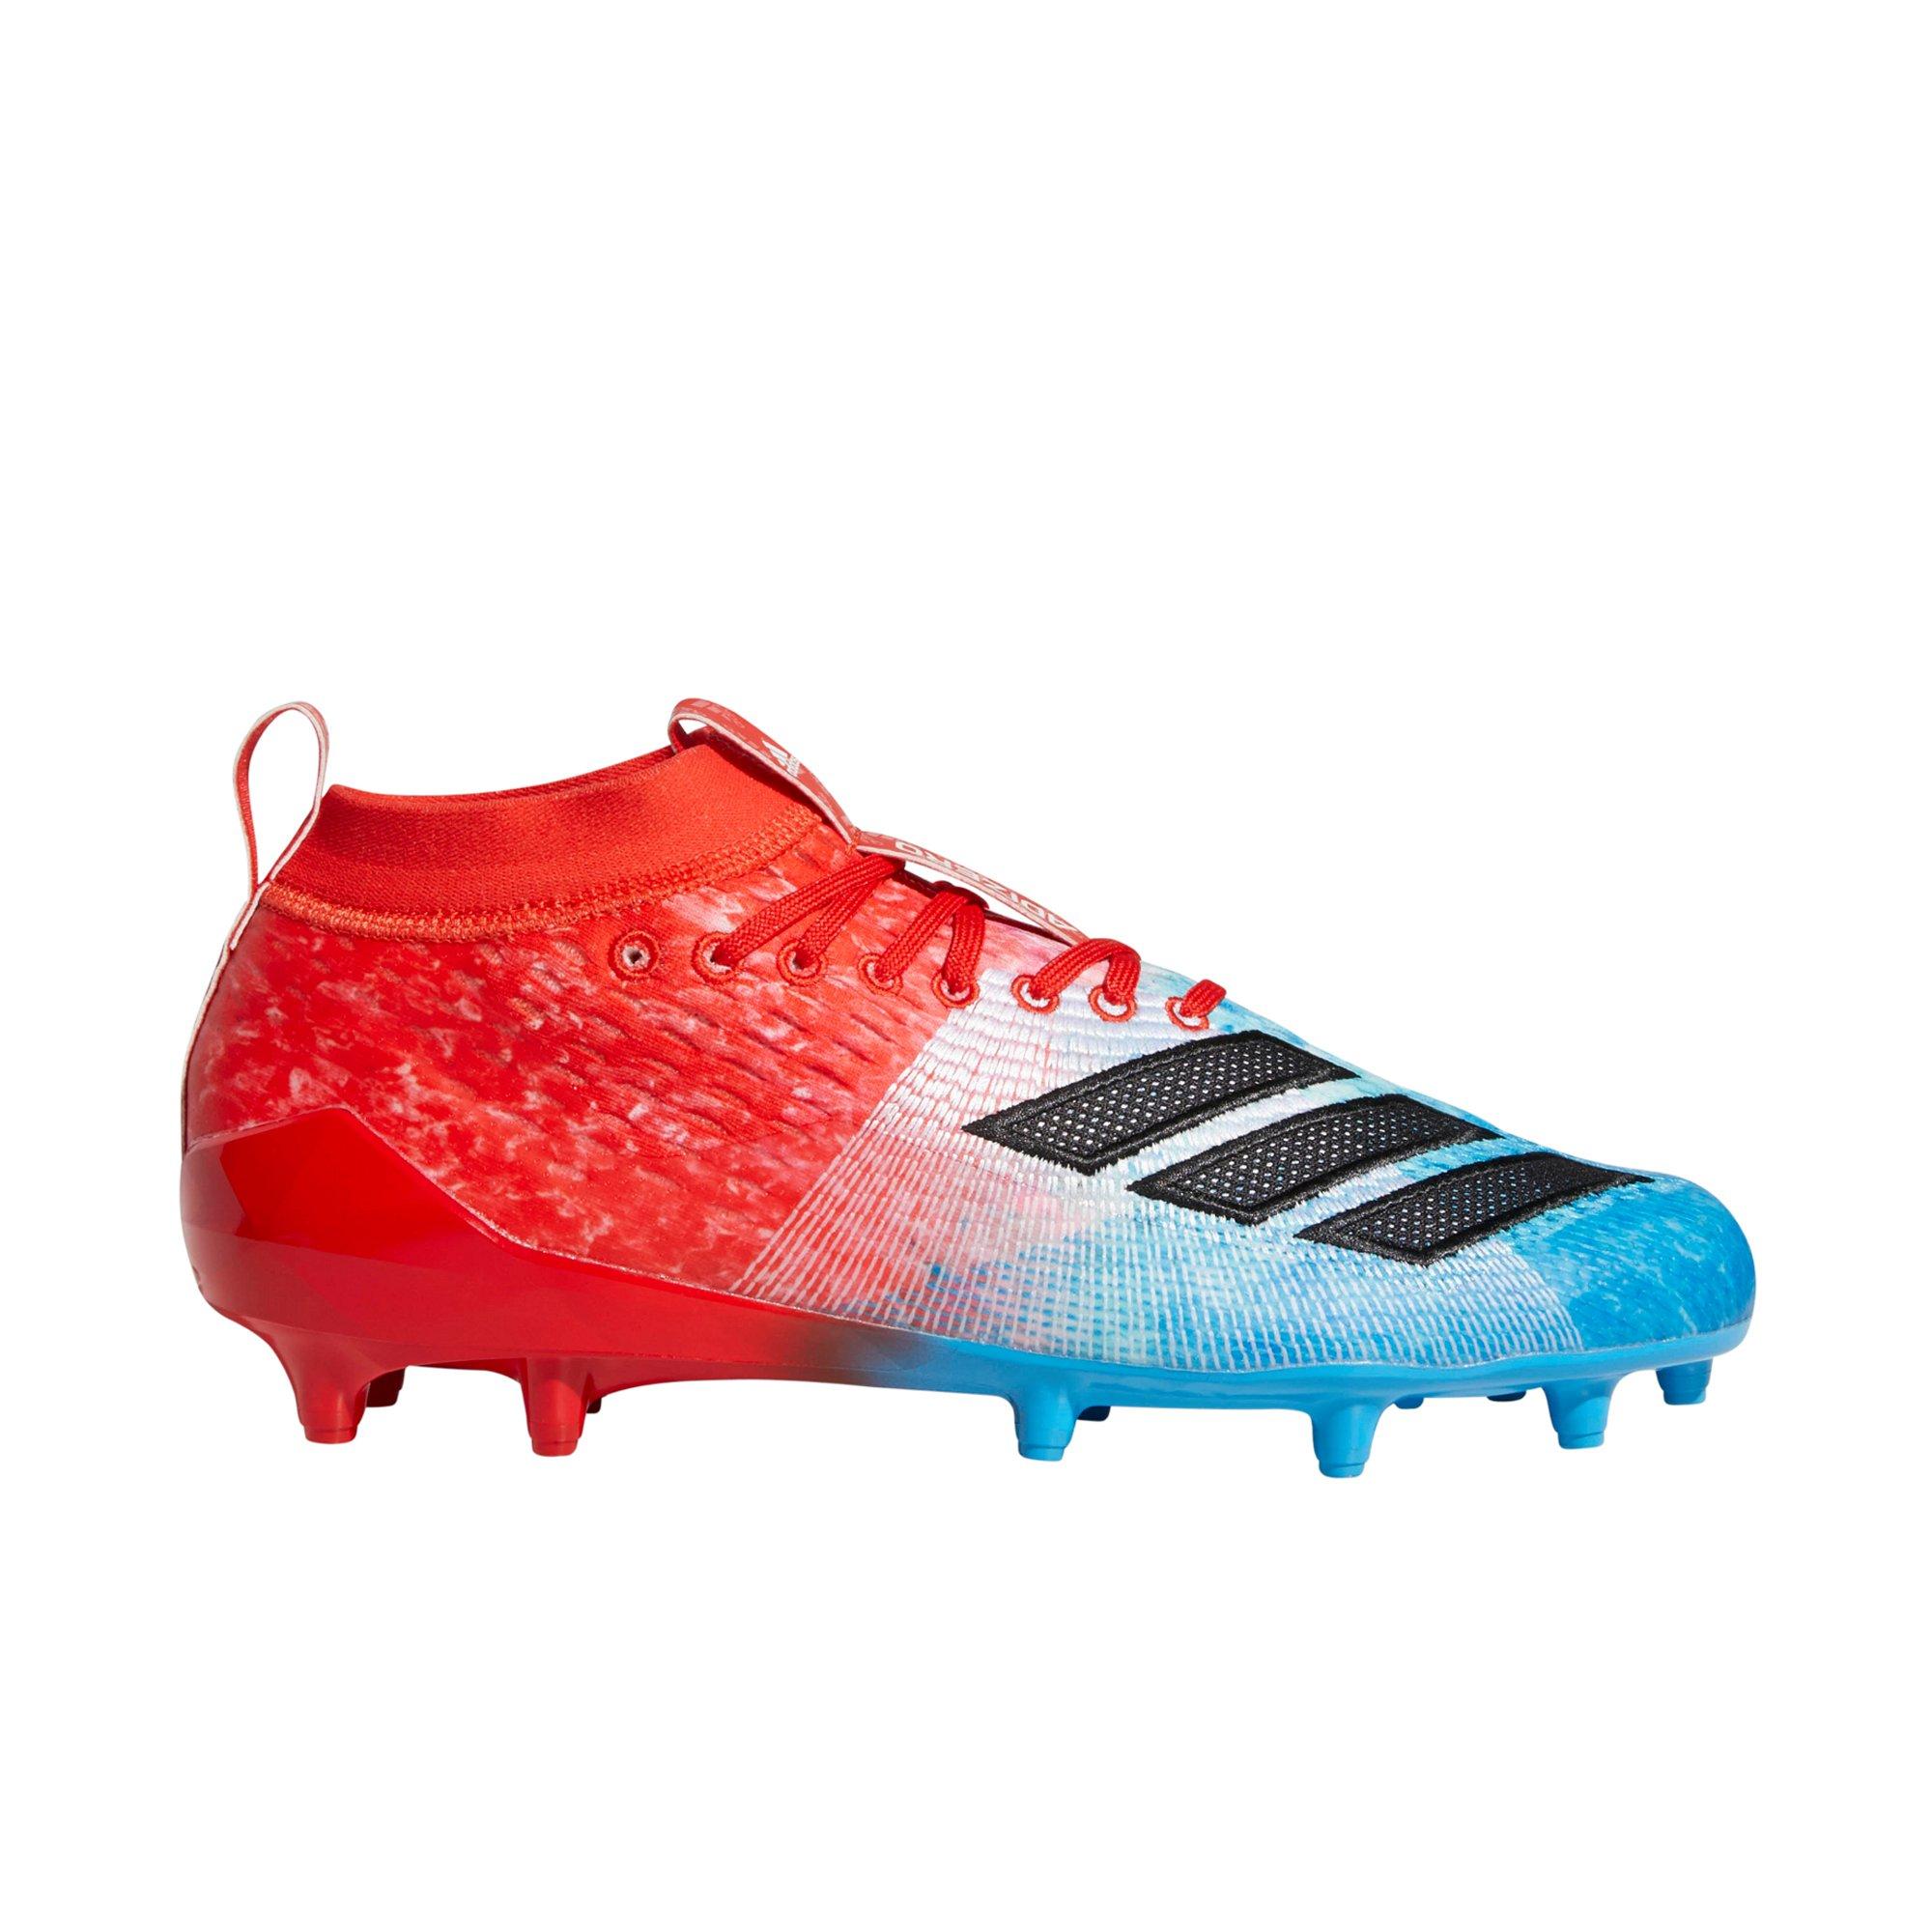 red and black adidas cleats